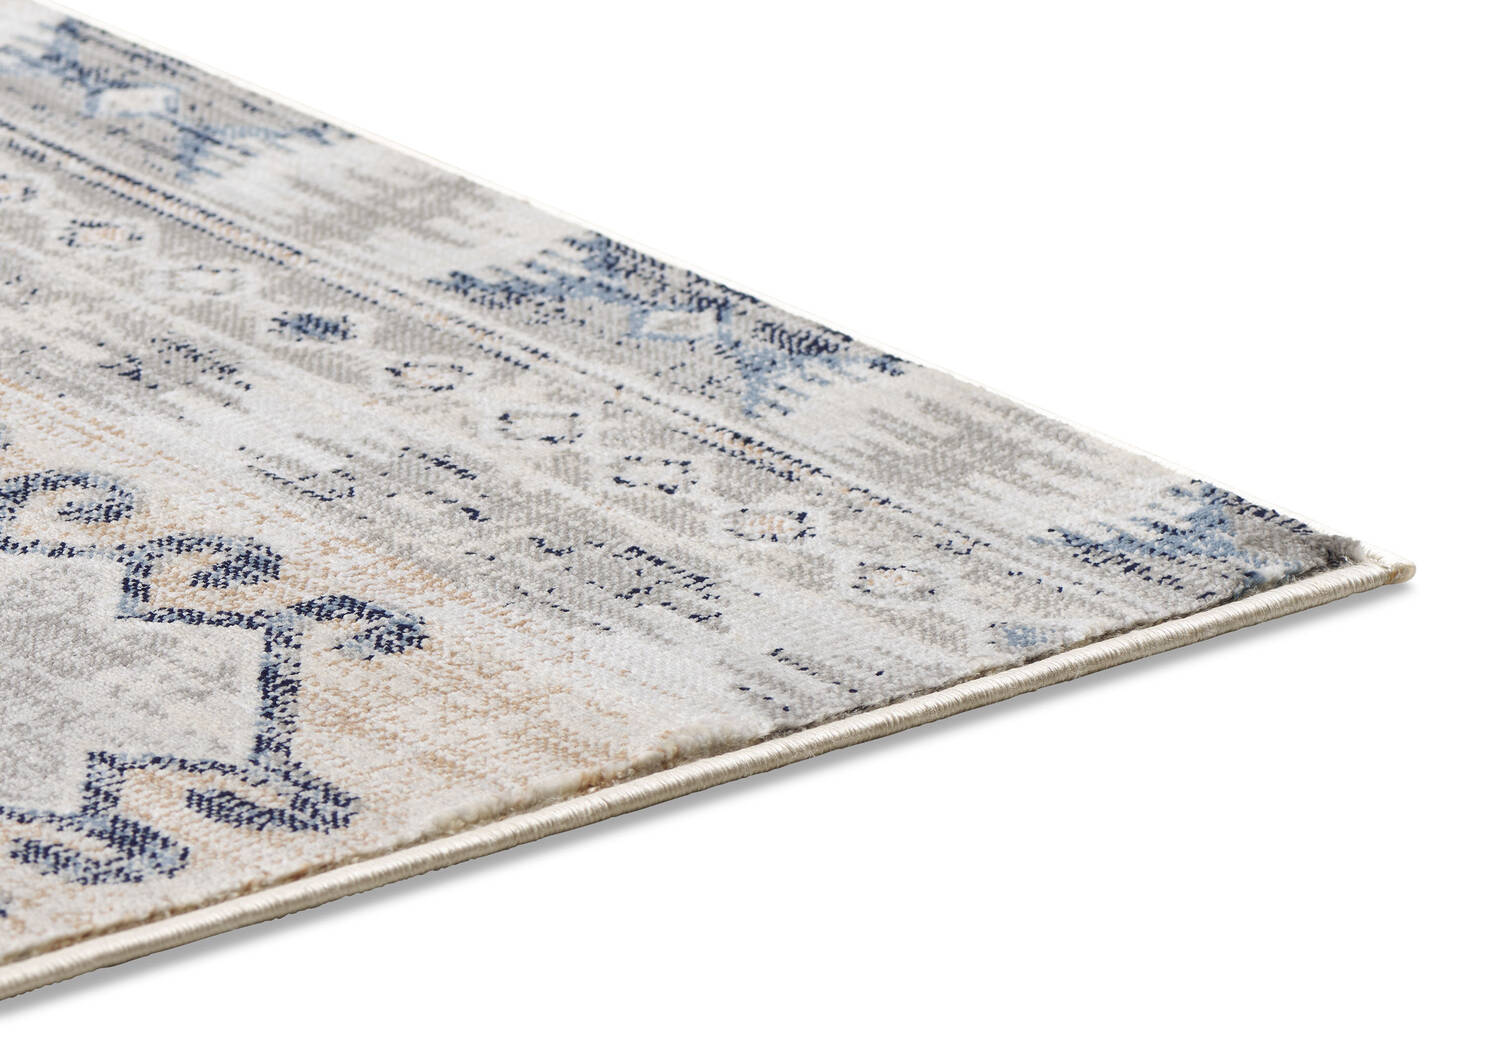 Levy Rug 61x91 Blue/Goldfield